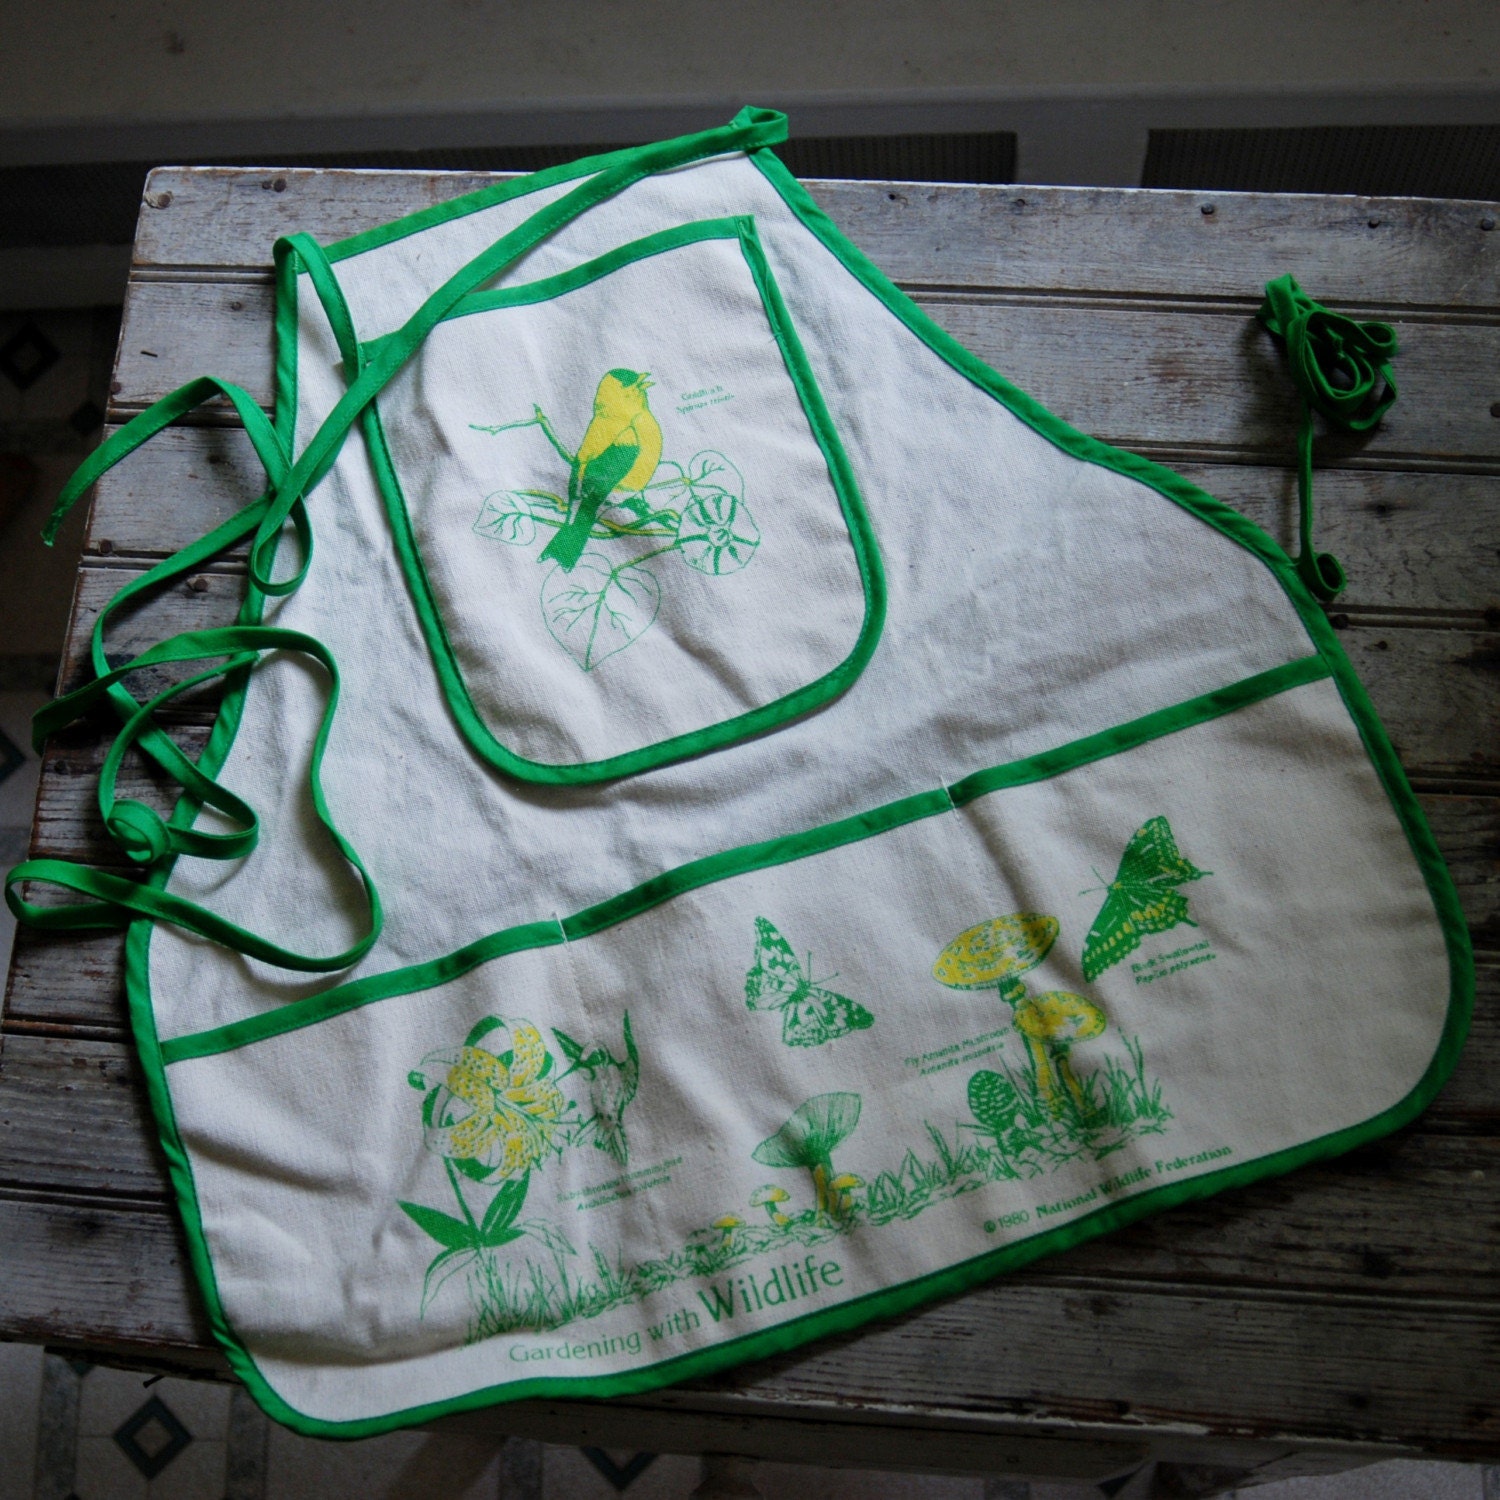 Gerdening with Wildlife vintage green and yello apron with birds and flowers